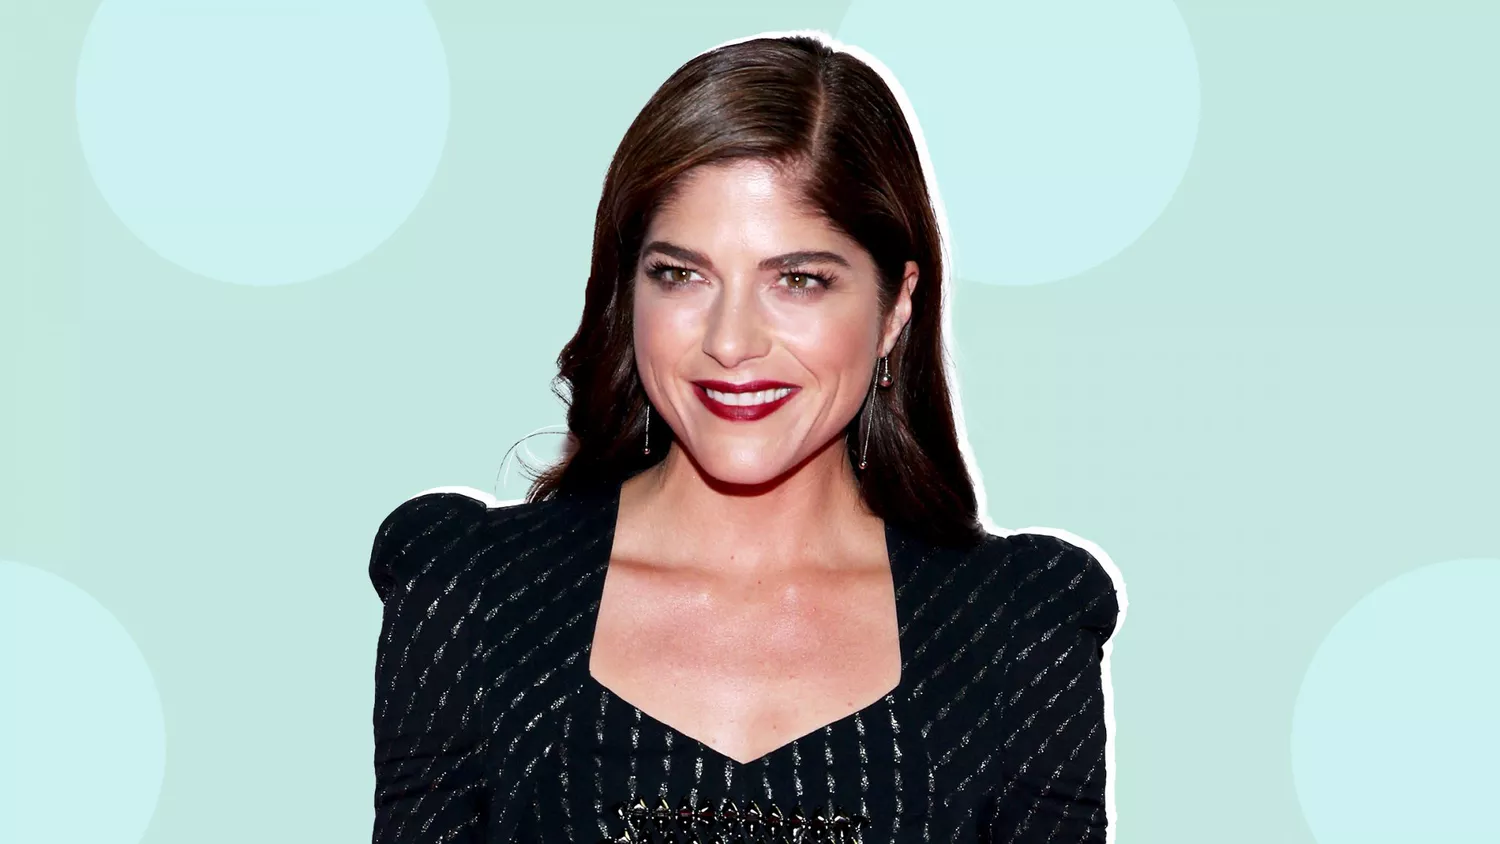 Selma-Blair-Shares-Her-First-MS-Symptoms-GettyImages-845132874